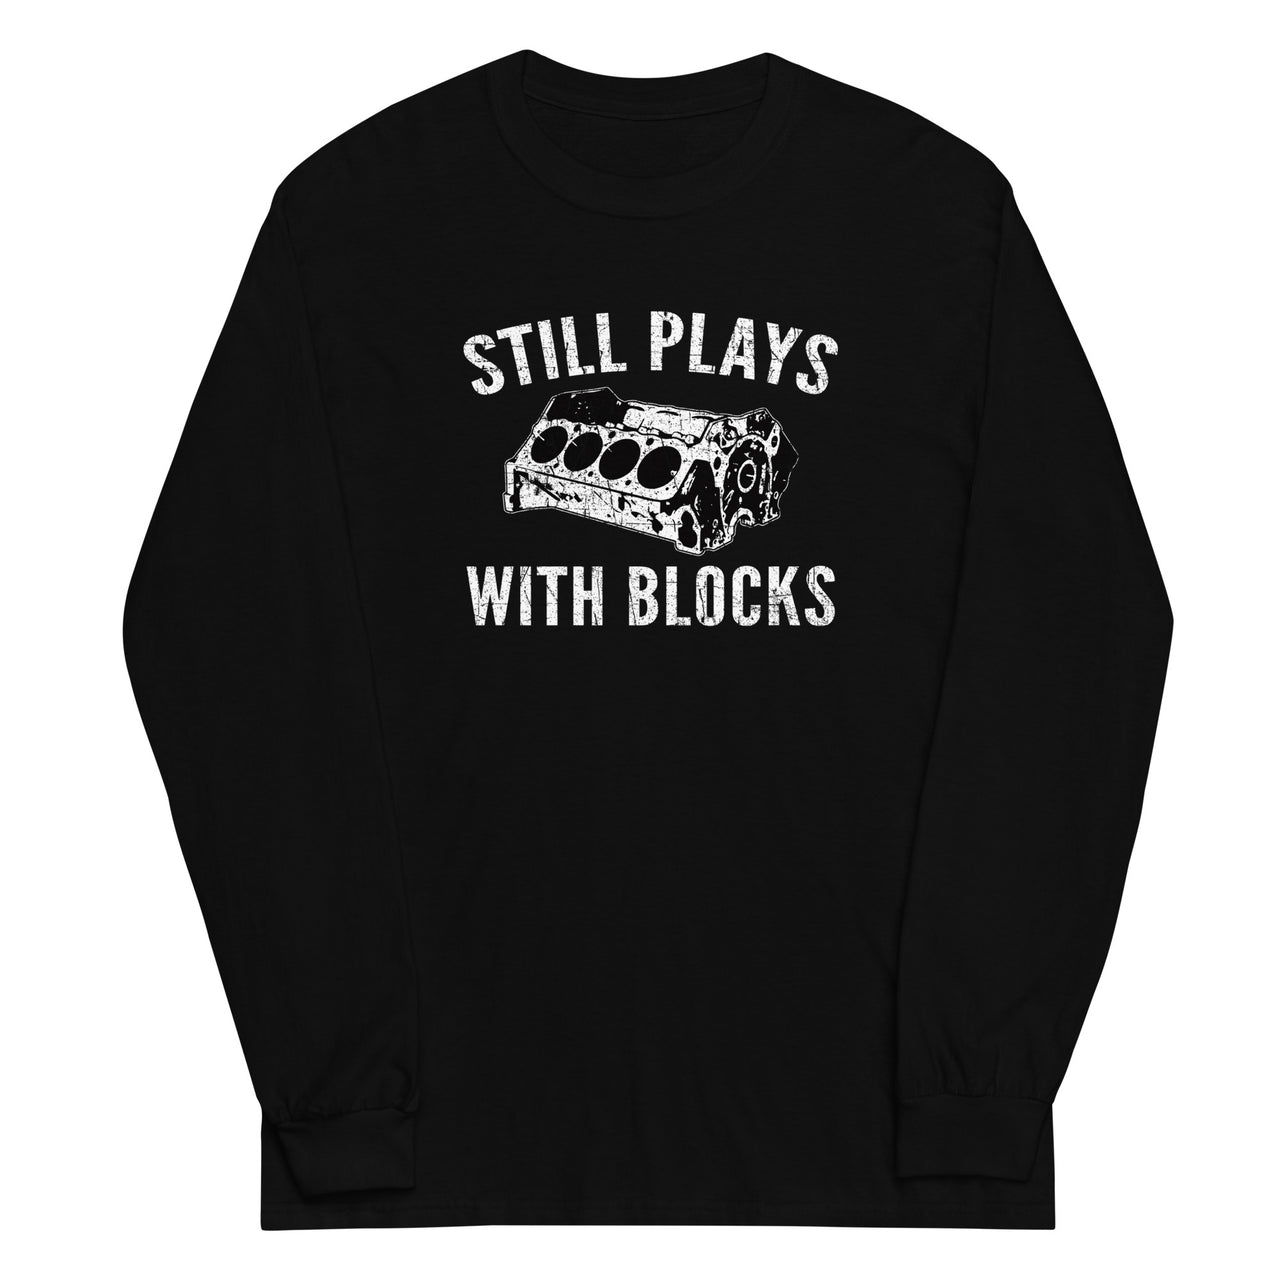 Still Plays With Blocks Car Enthusiasts Long Sleeve Shirt in black